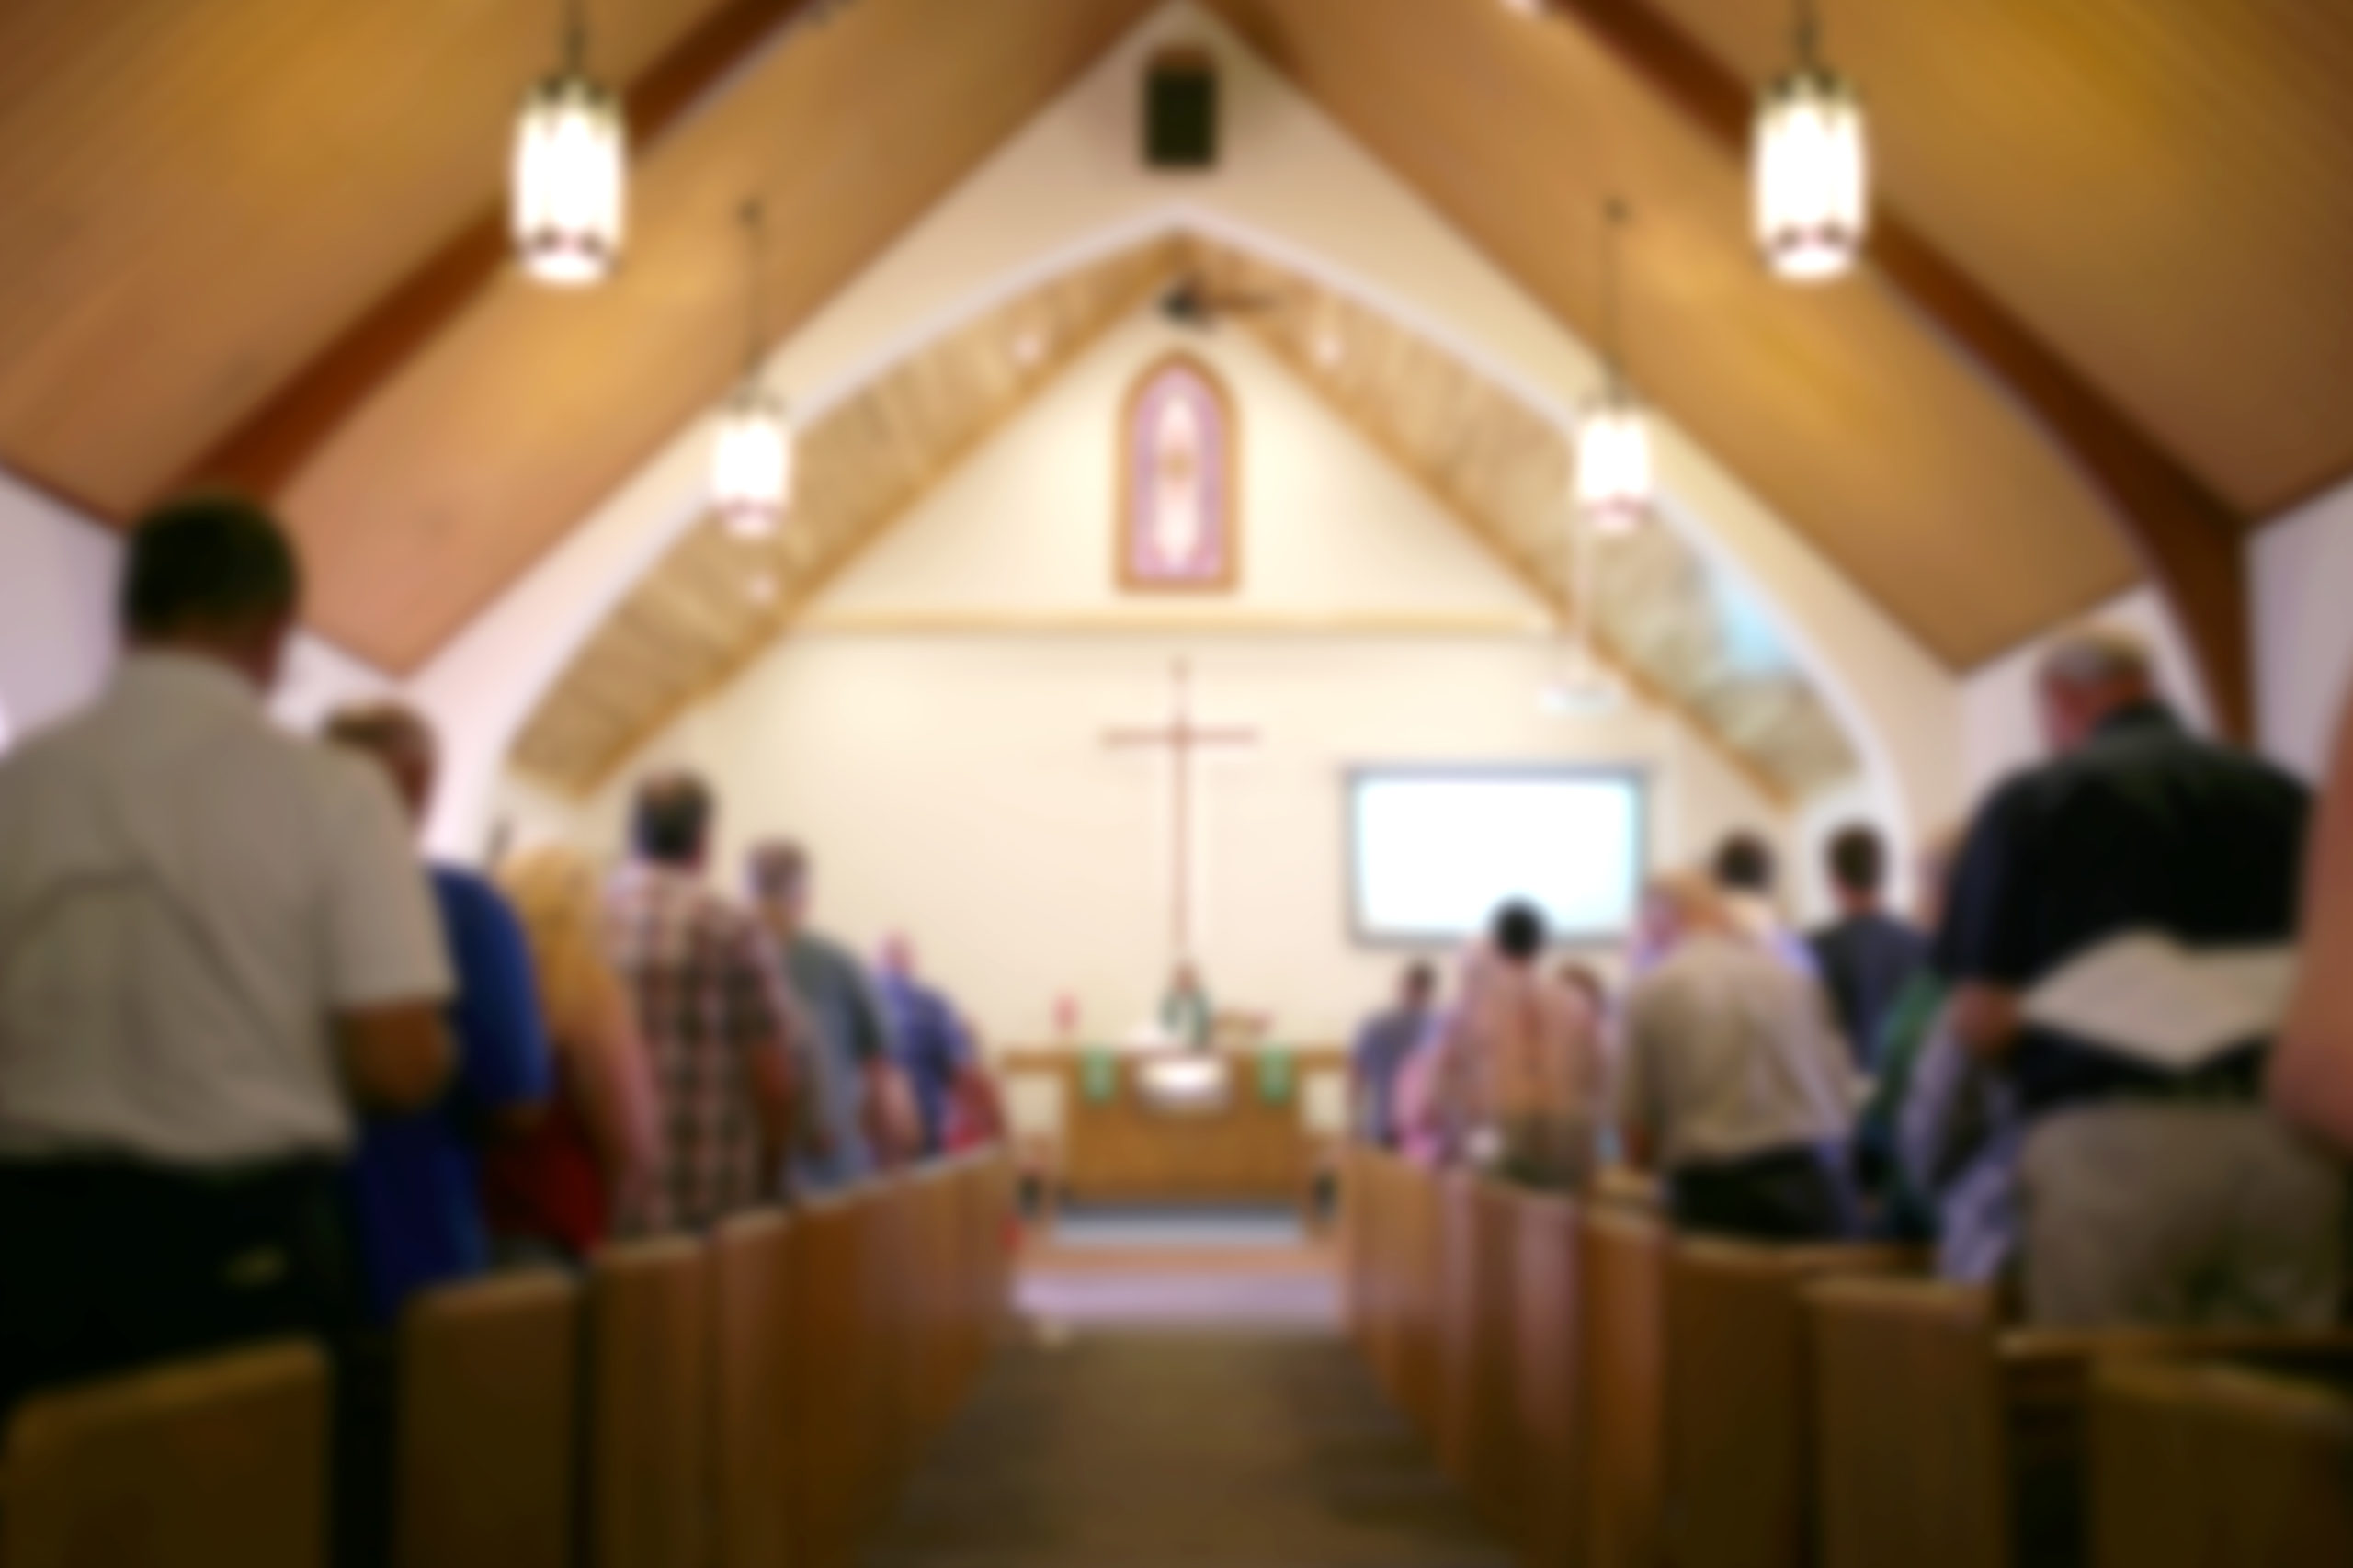 Find Community and Connection at Our Worship Services